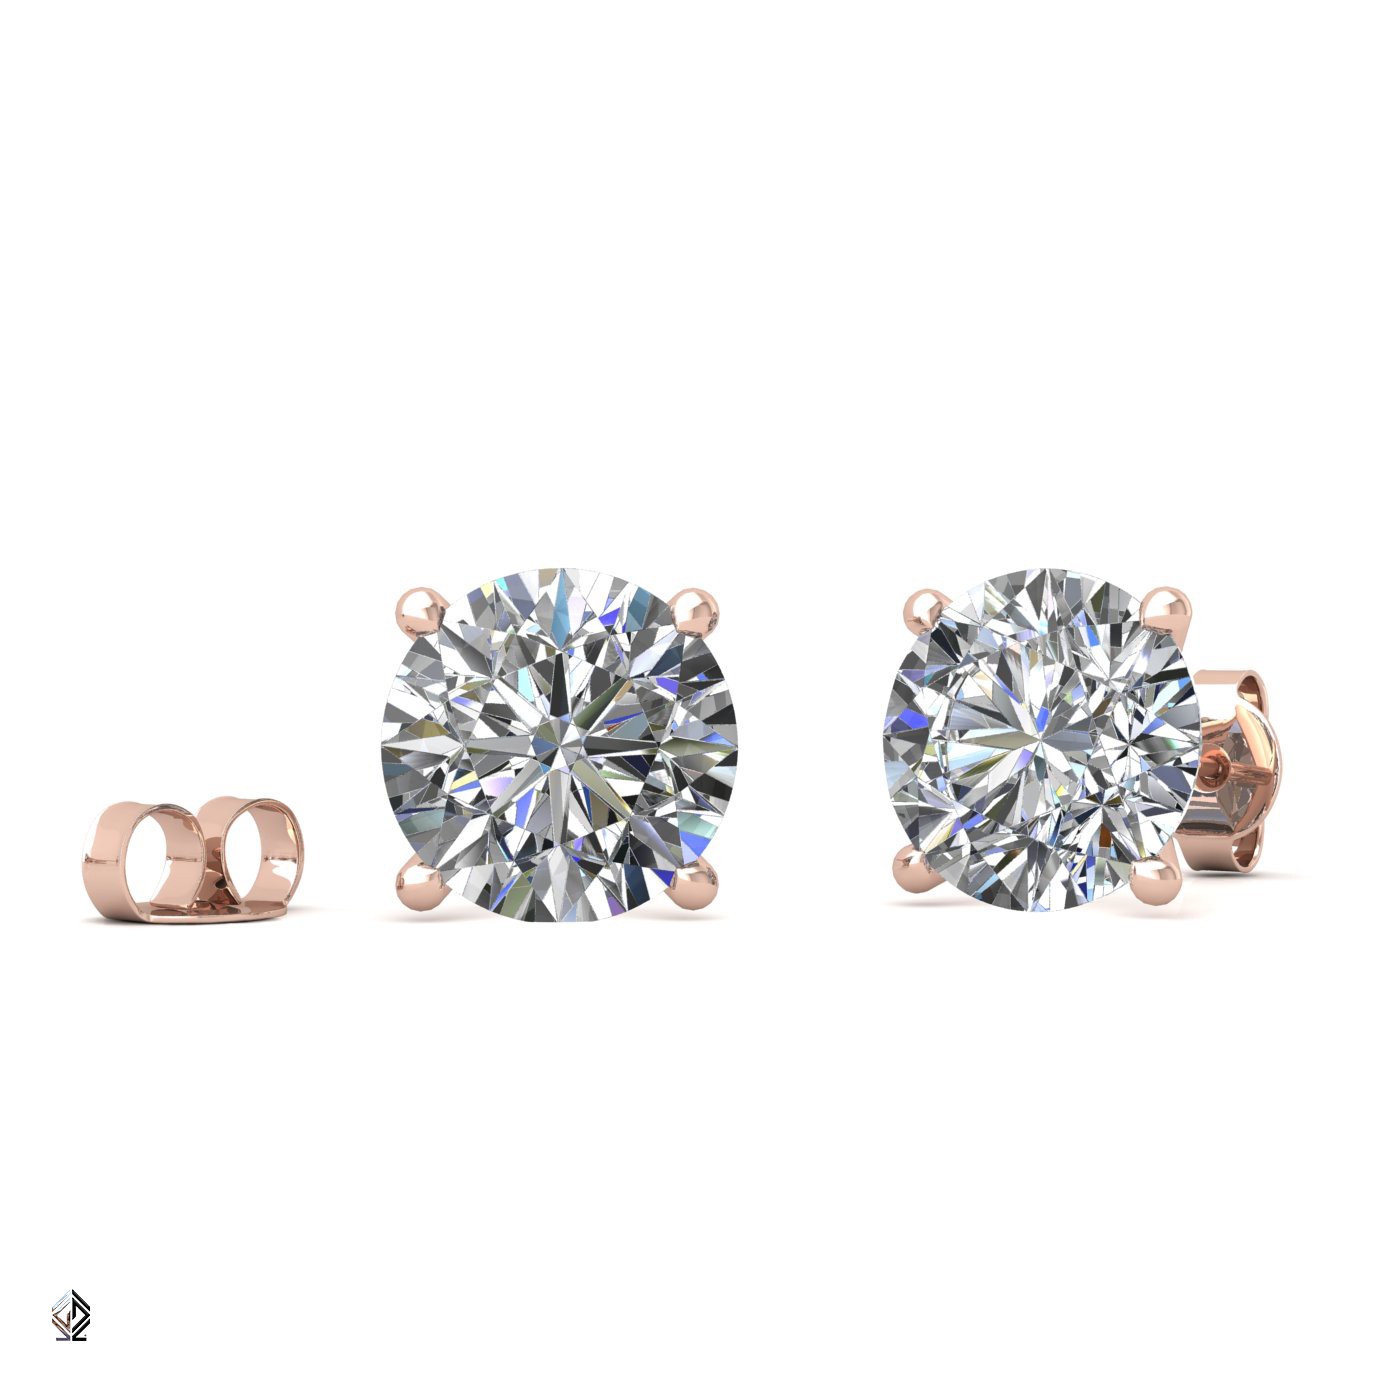 18k rose gold 0,5 ct each (1,0 tcw) 4 prongs round cut classic diamond earring studs Photos & images